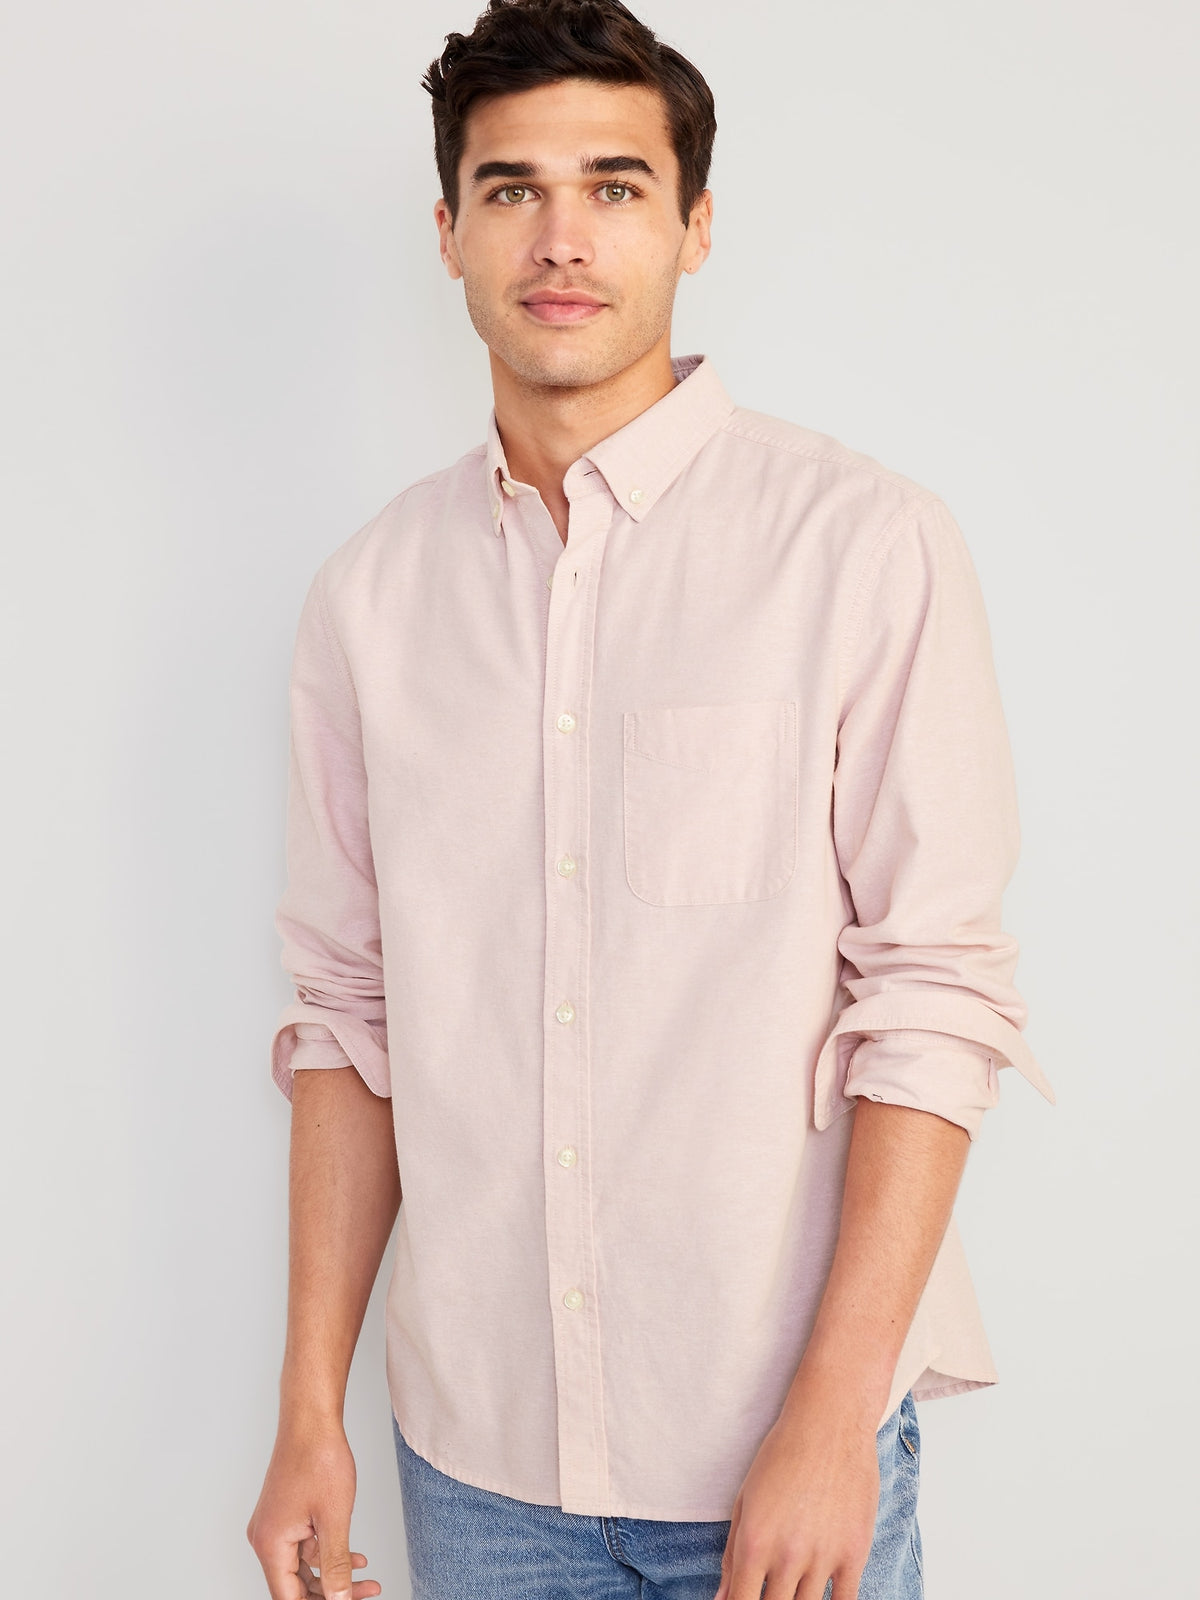 Classic Fit Everyday Oxford Shirt for Men